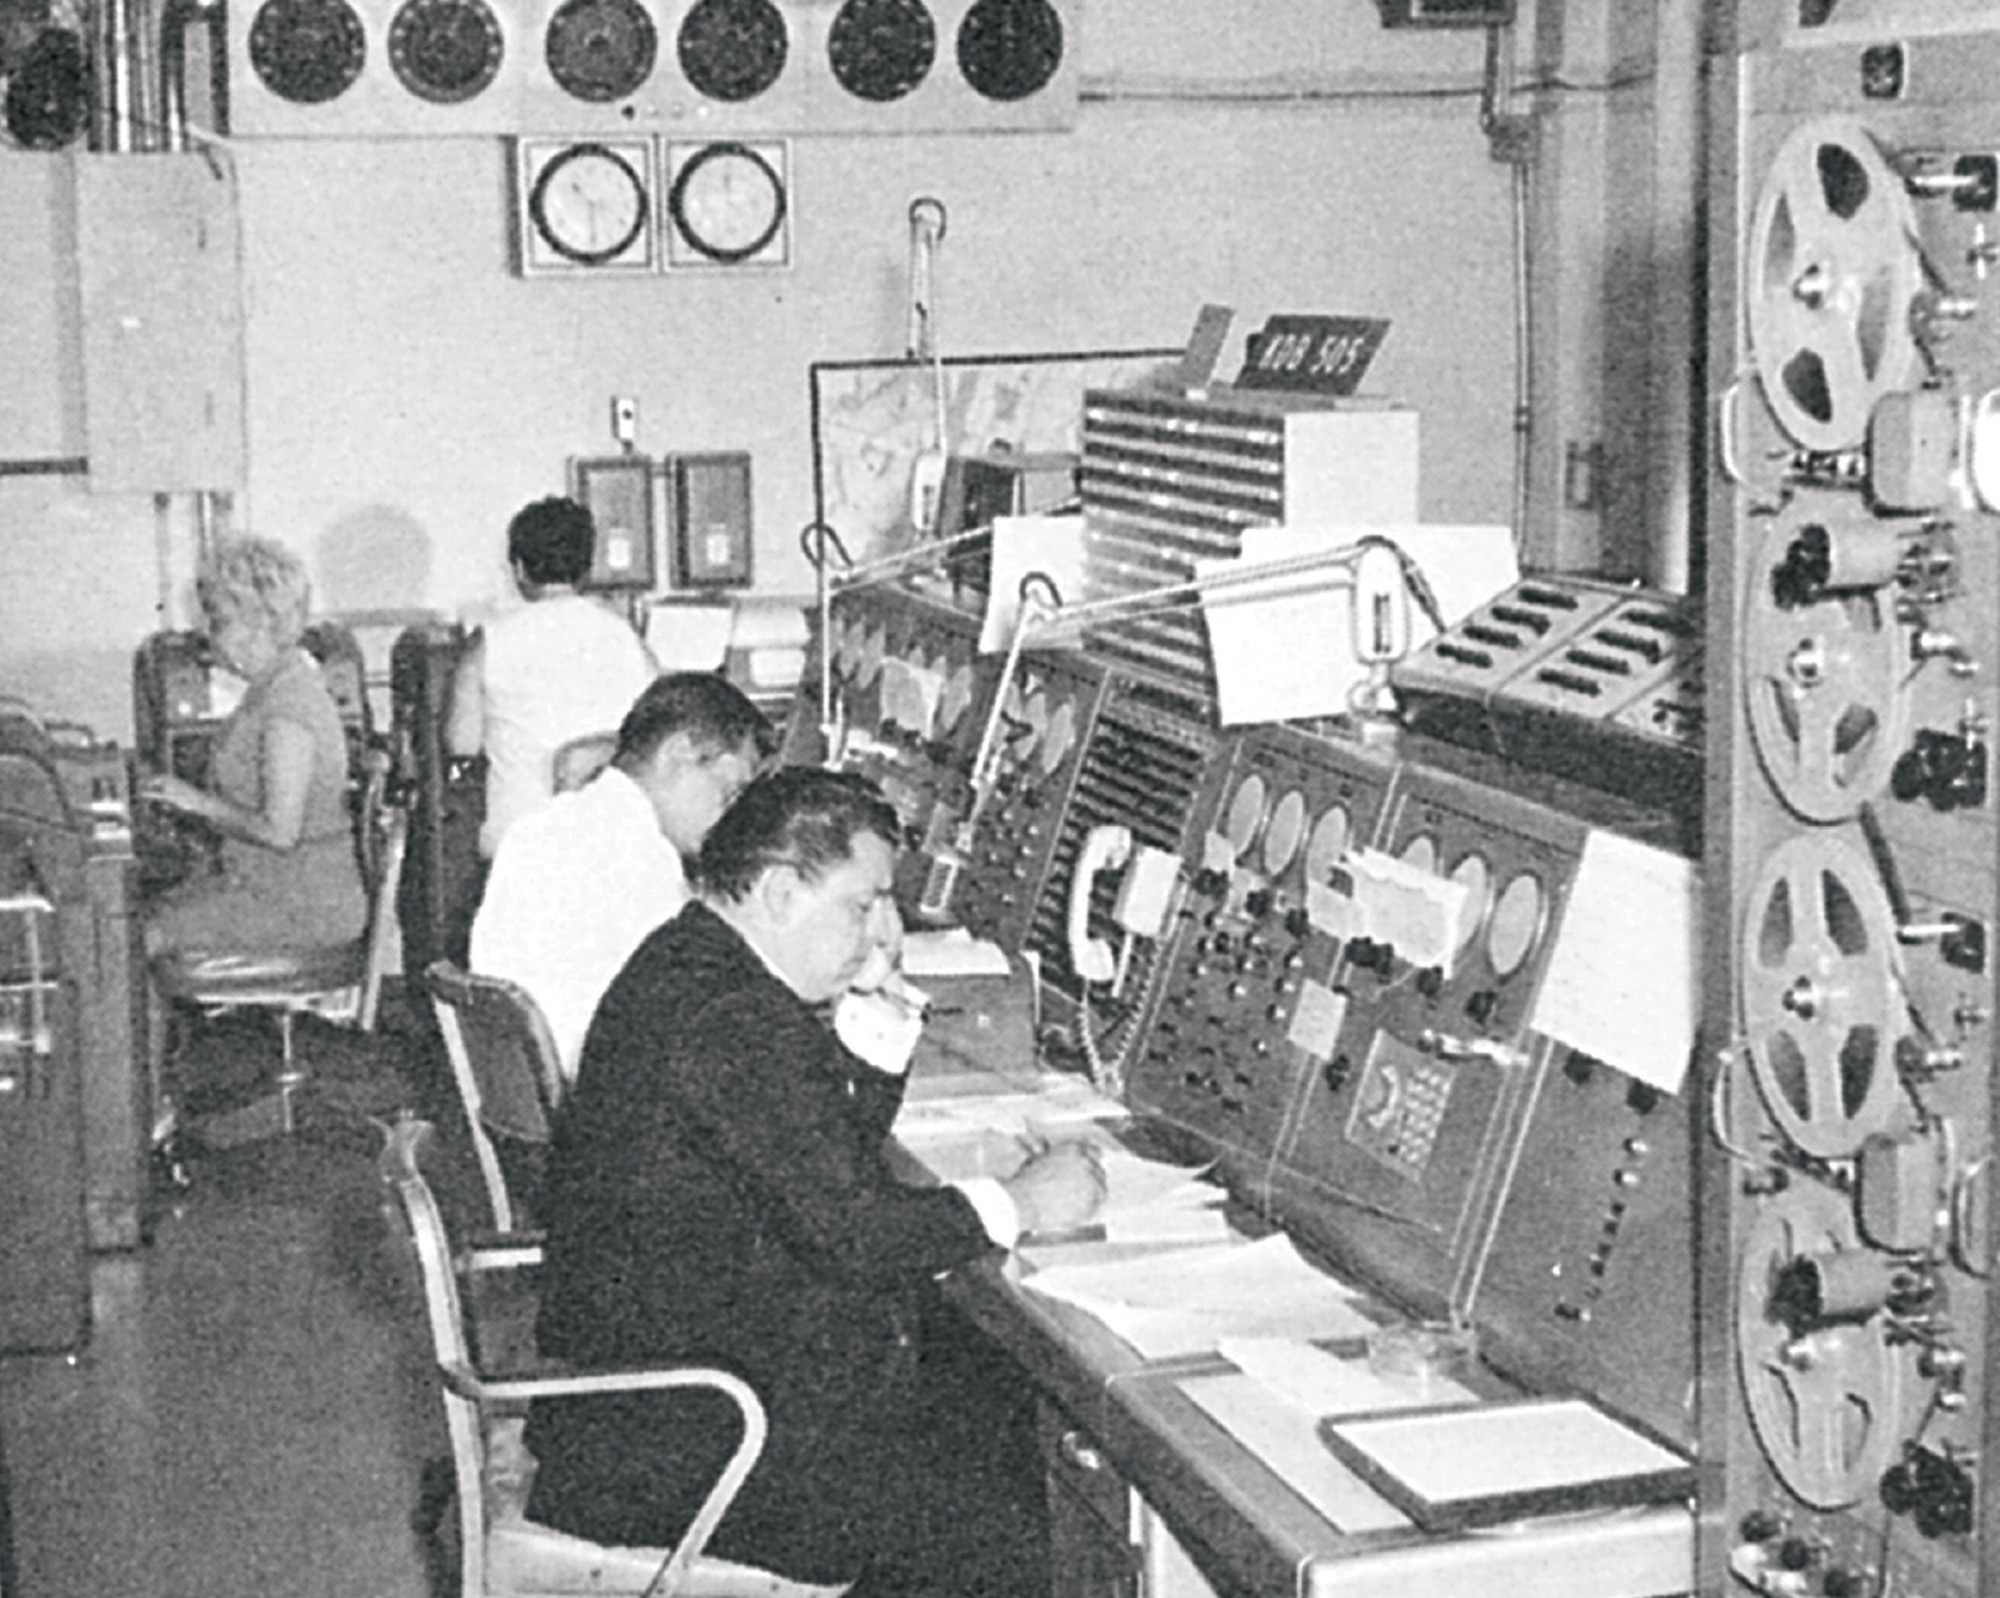 A 1966 photograph of workers at an analog traffic control center in New York City.